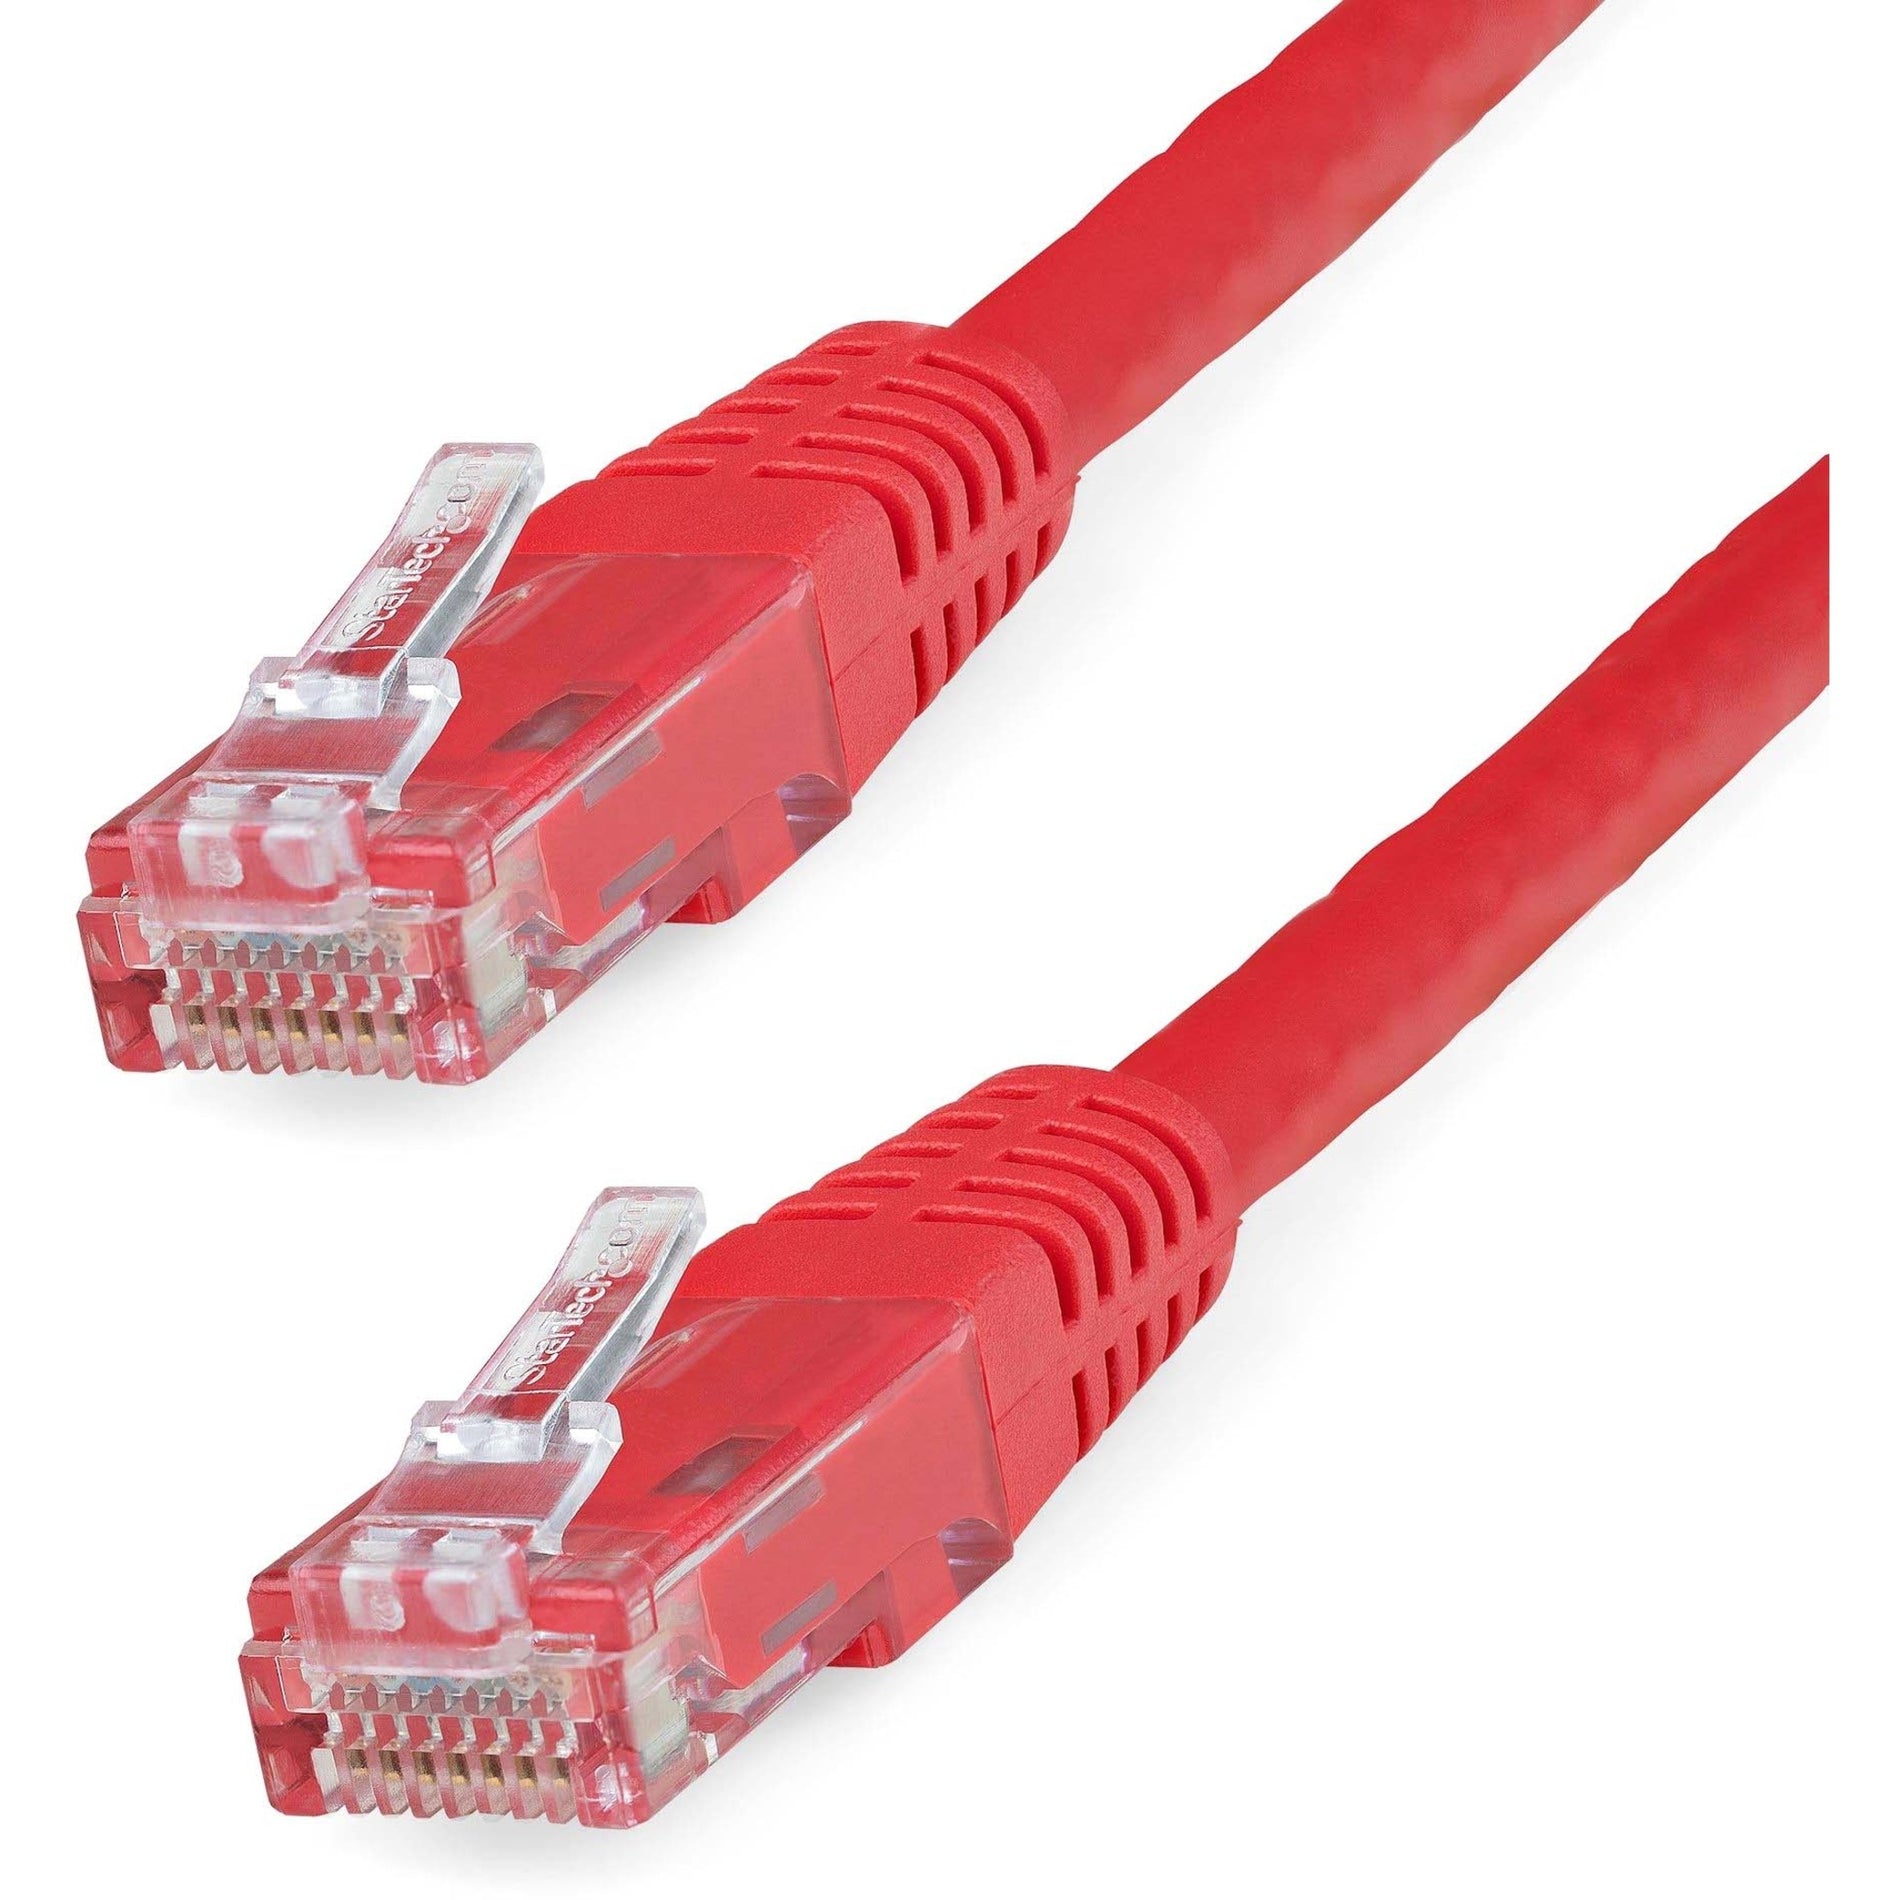 StarTech.com C6PATCH6RD 6ft Red Cat6 UTP Patch Cable ETL Verified, 10 Gbit/s Data Transfer Rate, Strain Relief